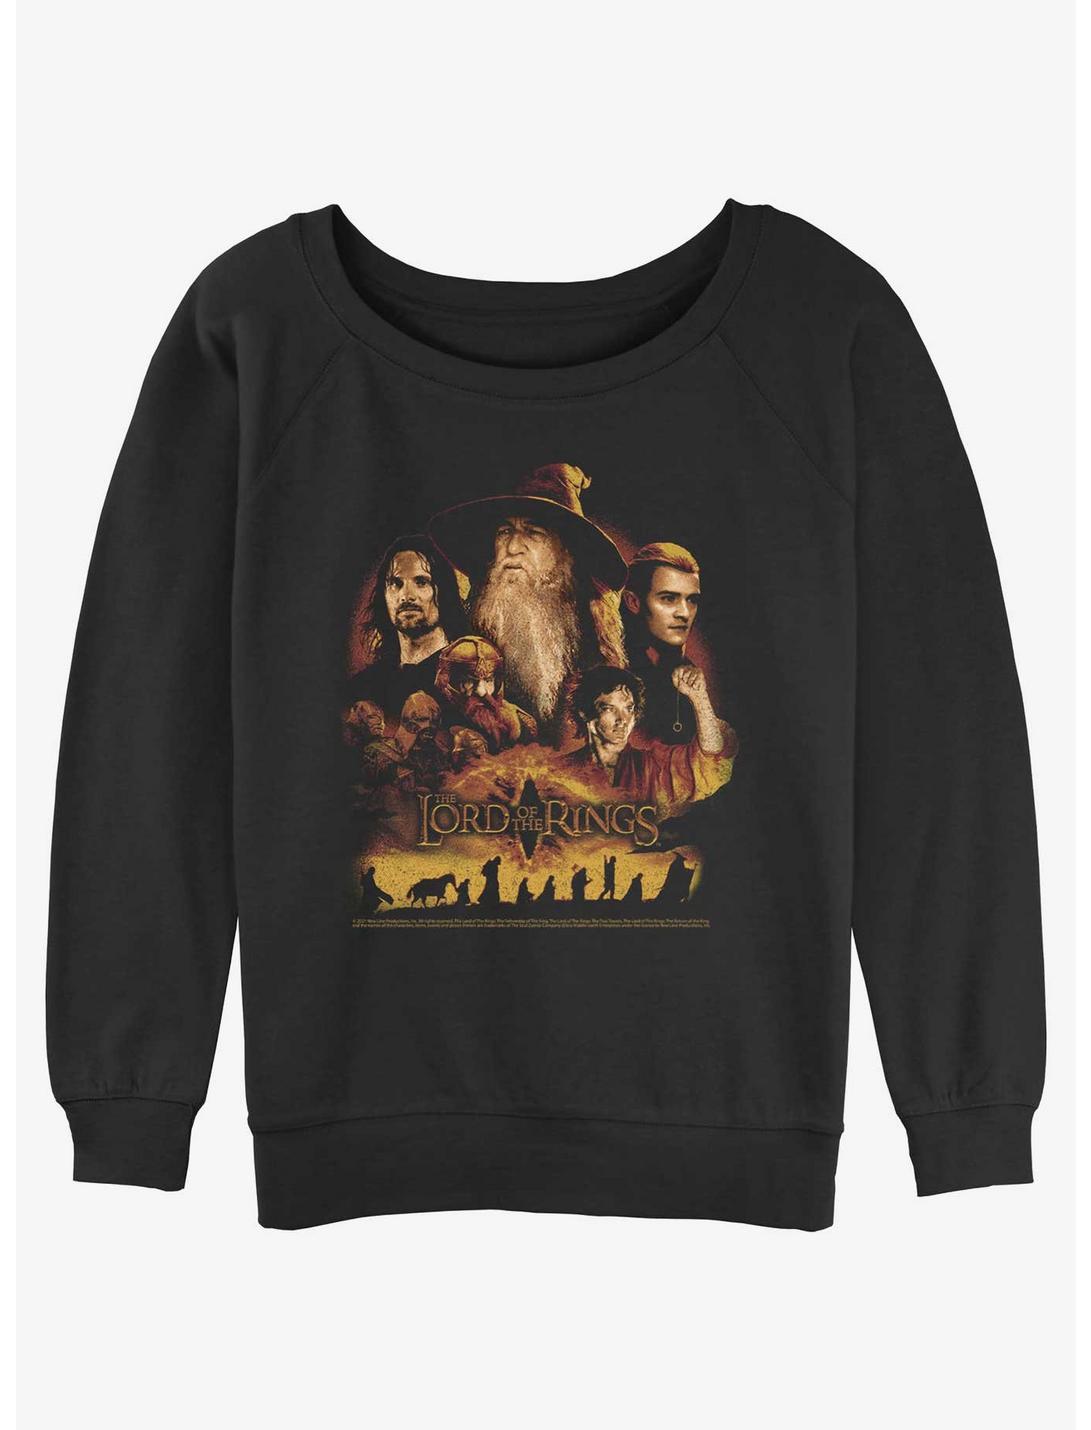 The Lord of the Rings Character Heads Womens Slouchy Sweatshirt, BLACK, hi-res